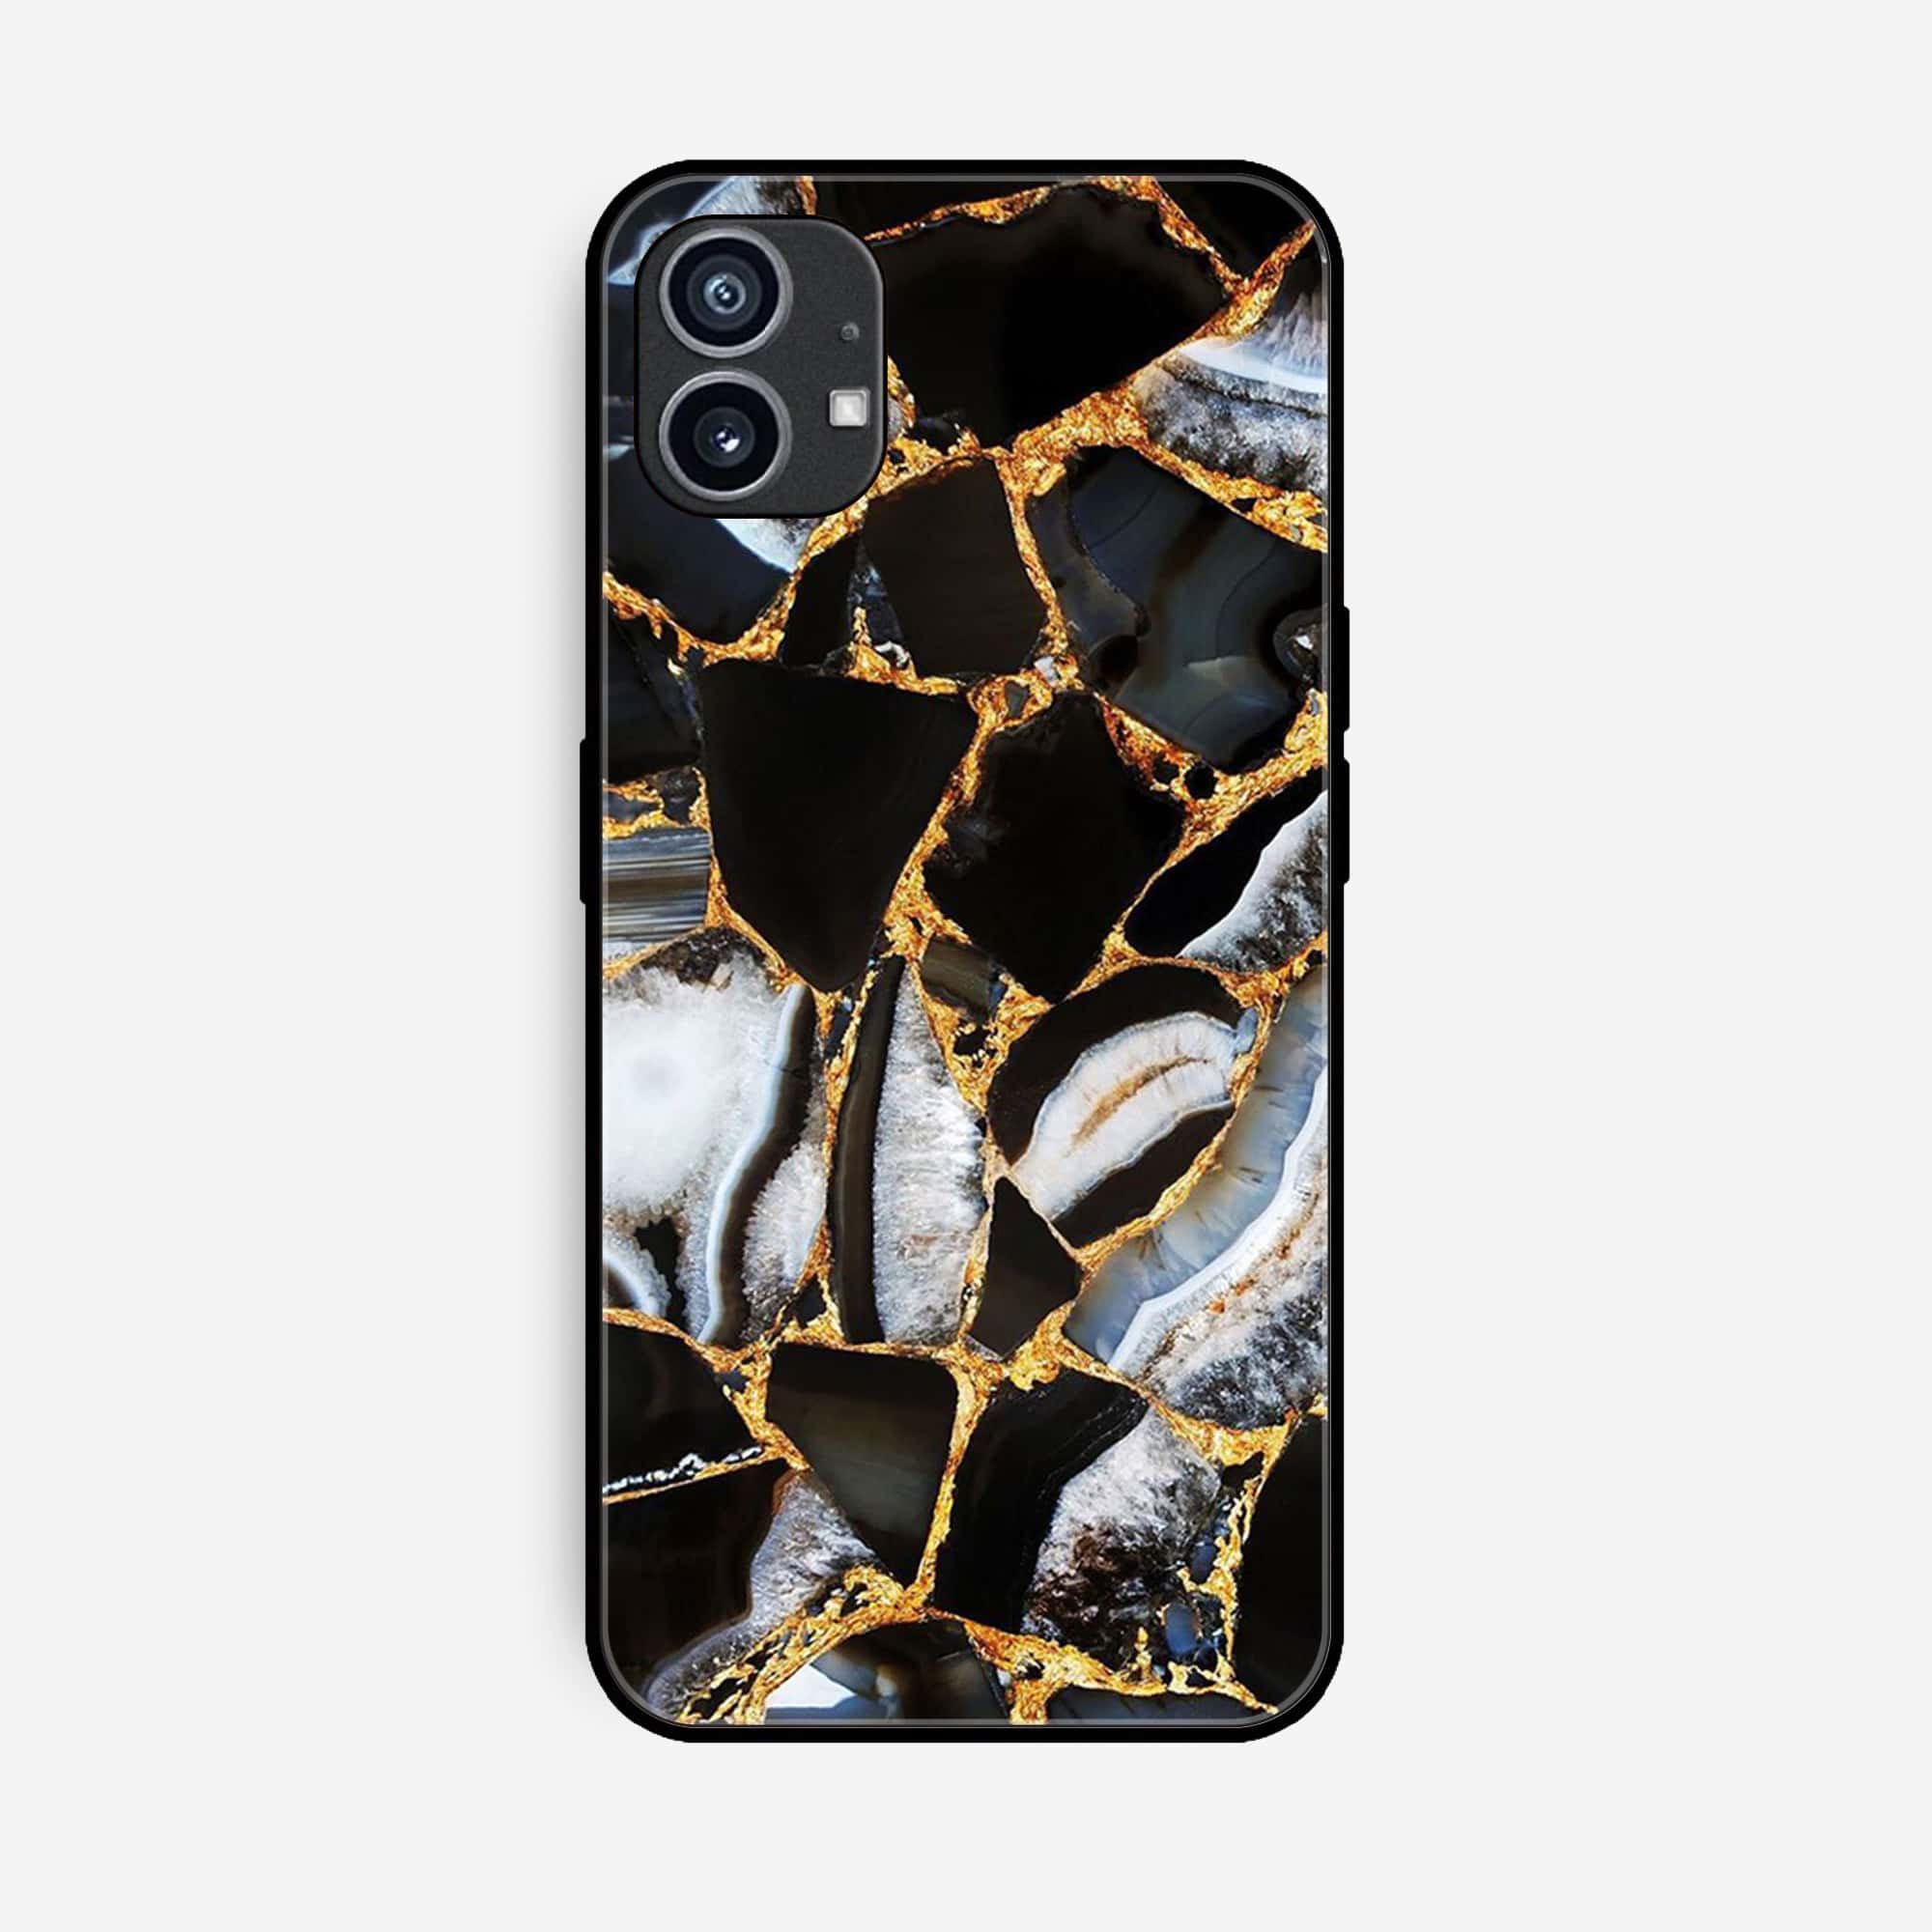 Nothing Phone (1)  Black Marble Series Premium Printed Glass soft Bumper shock Proof Case